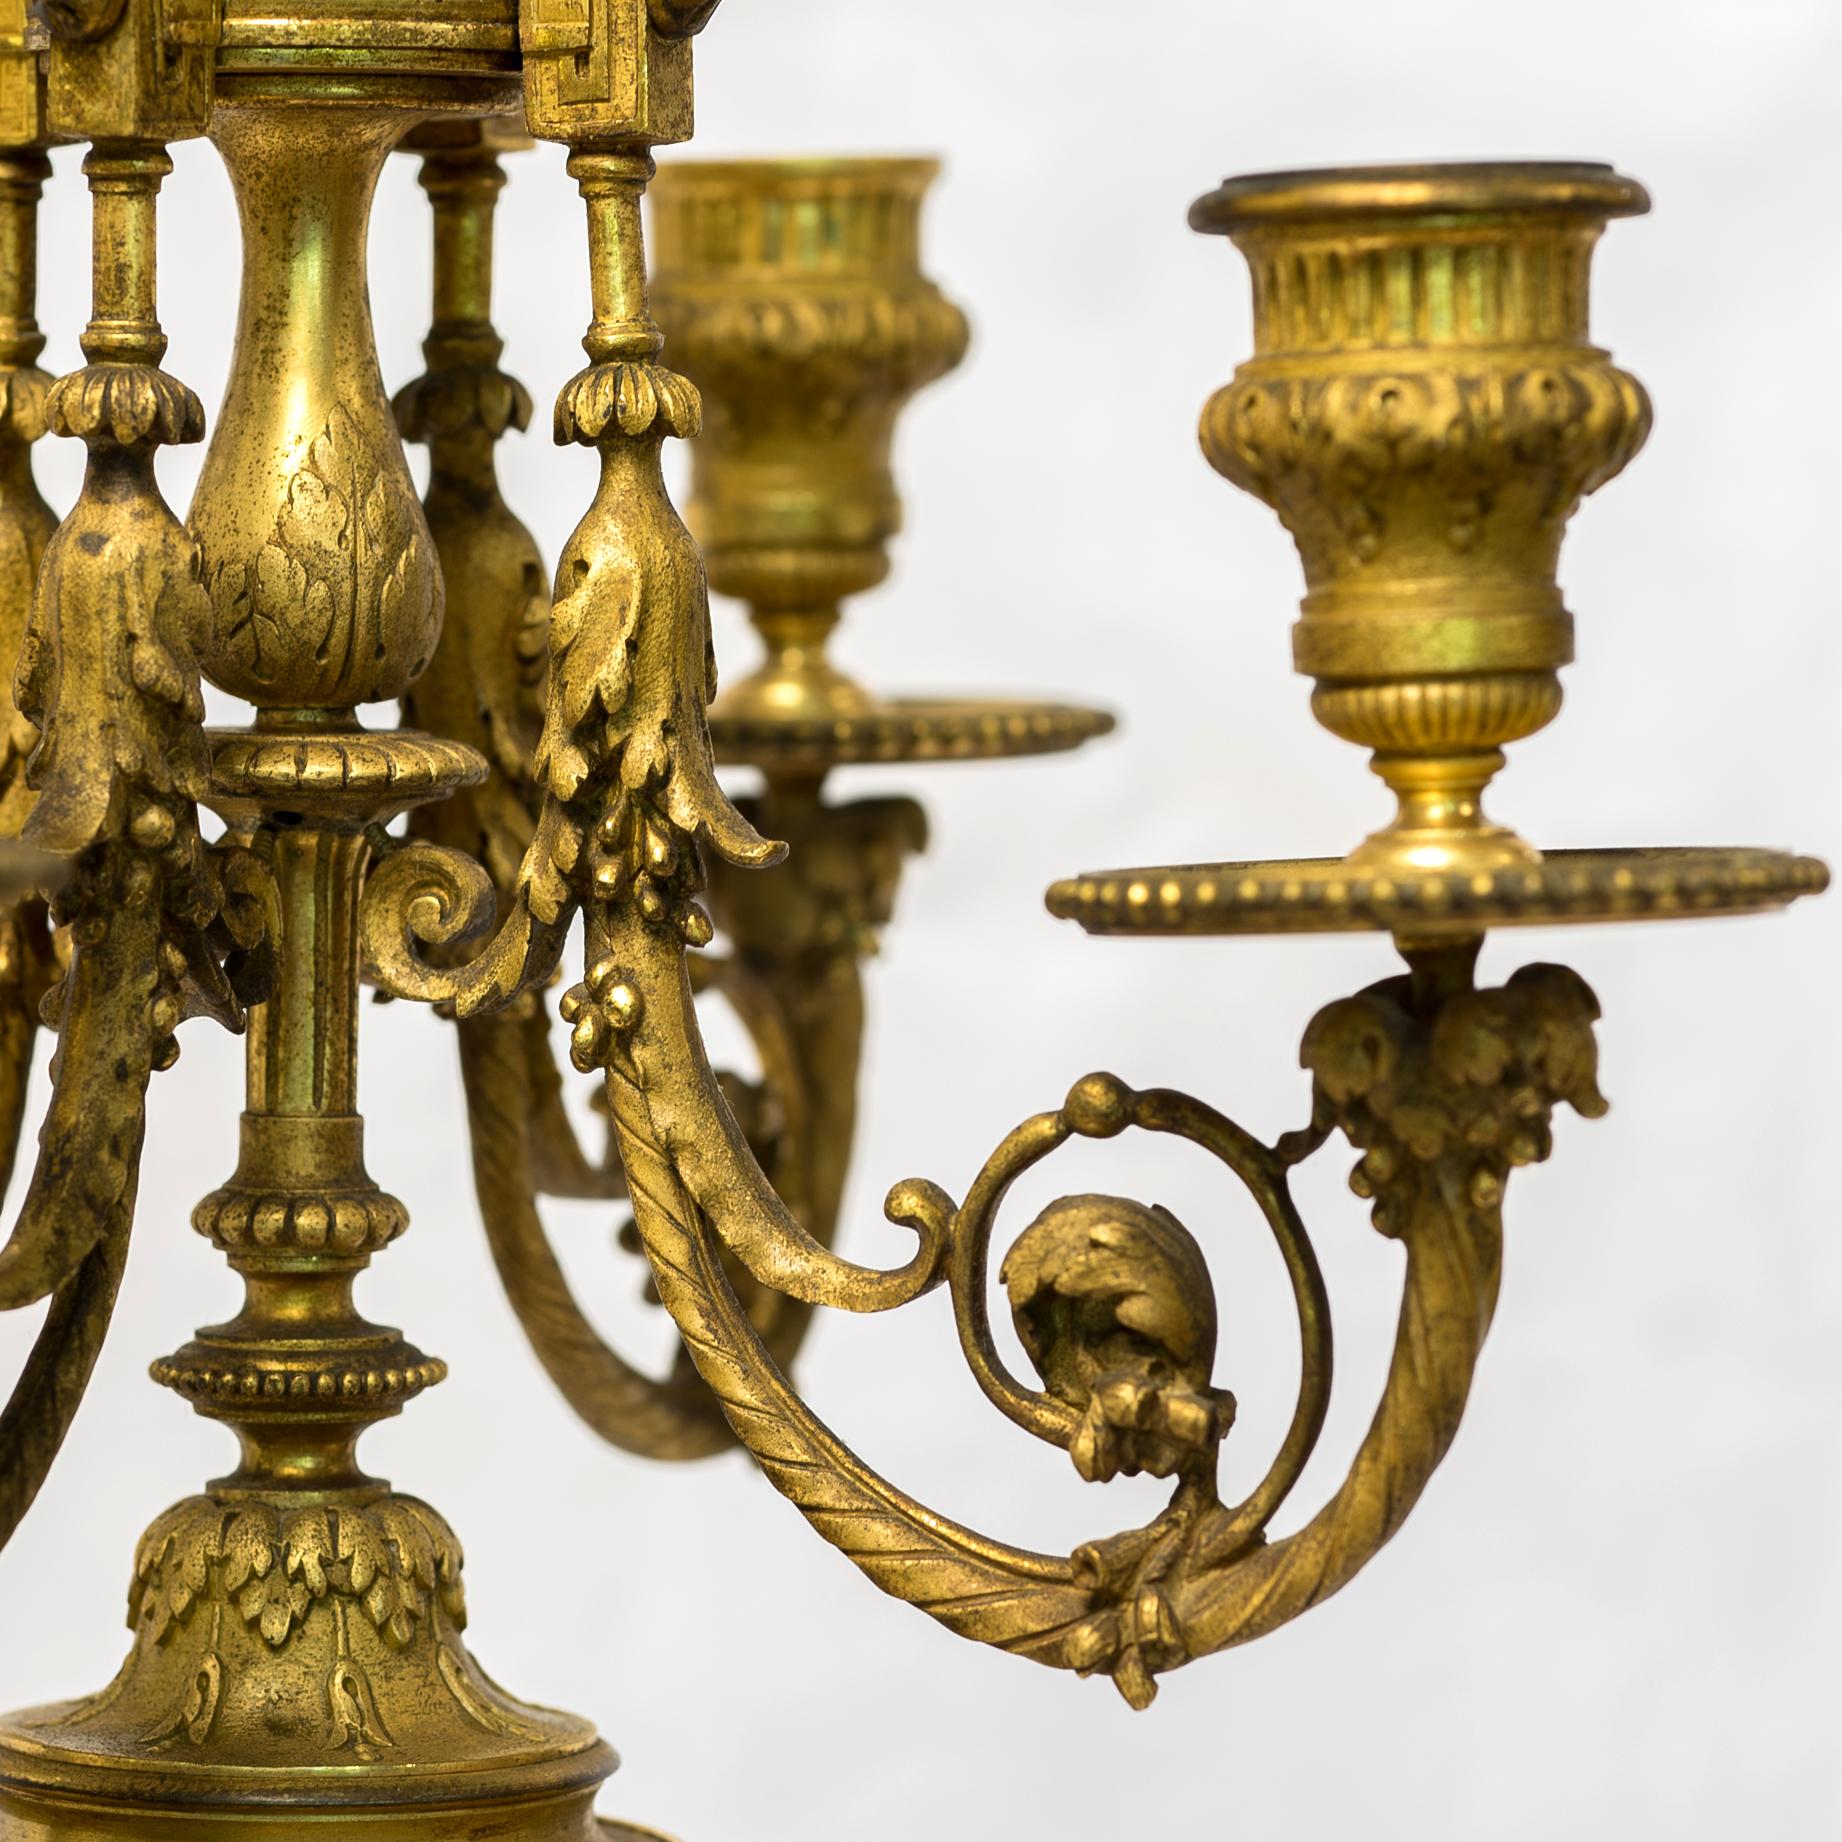 Rare Pair of Four-Branch Gilt Bronze & Jeweled Sèvres Style Porcelain Candelabra For Sale 1